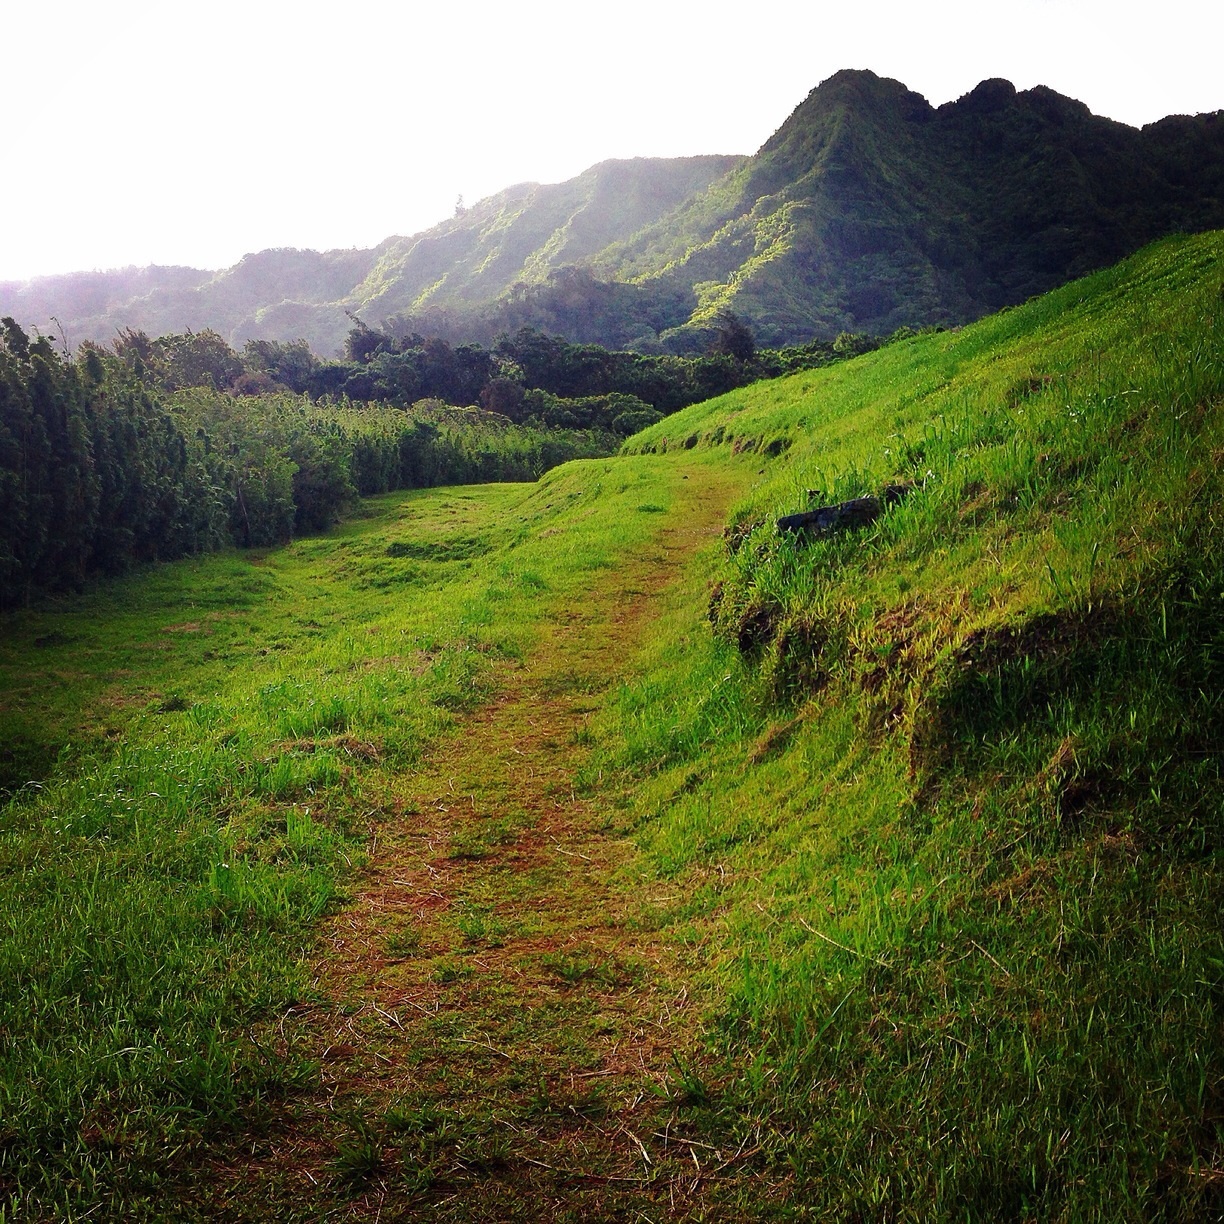 Nature close by to the city is among the best reasons to travel to Honolulu